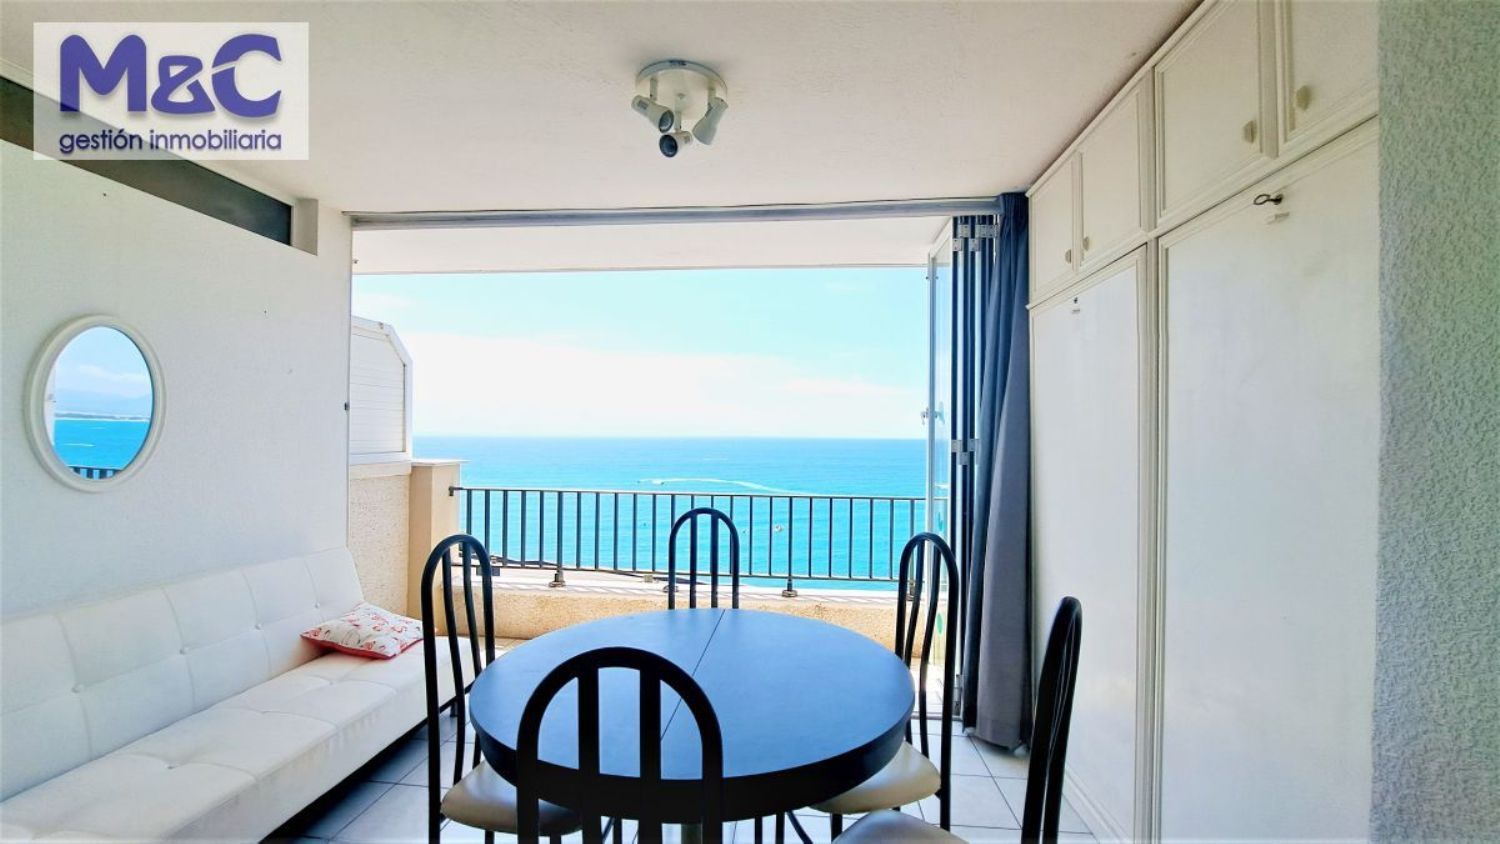 Flat for sale on the seafront on Calle de Tortosa, in Salou